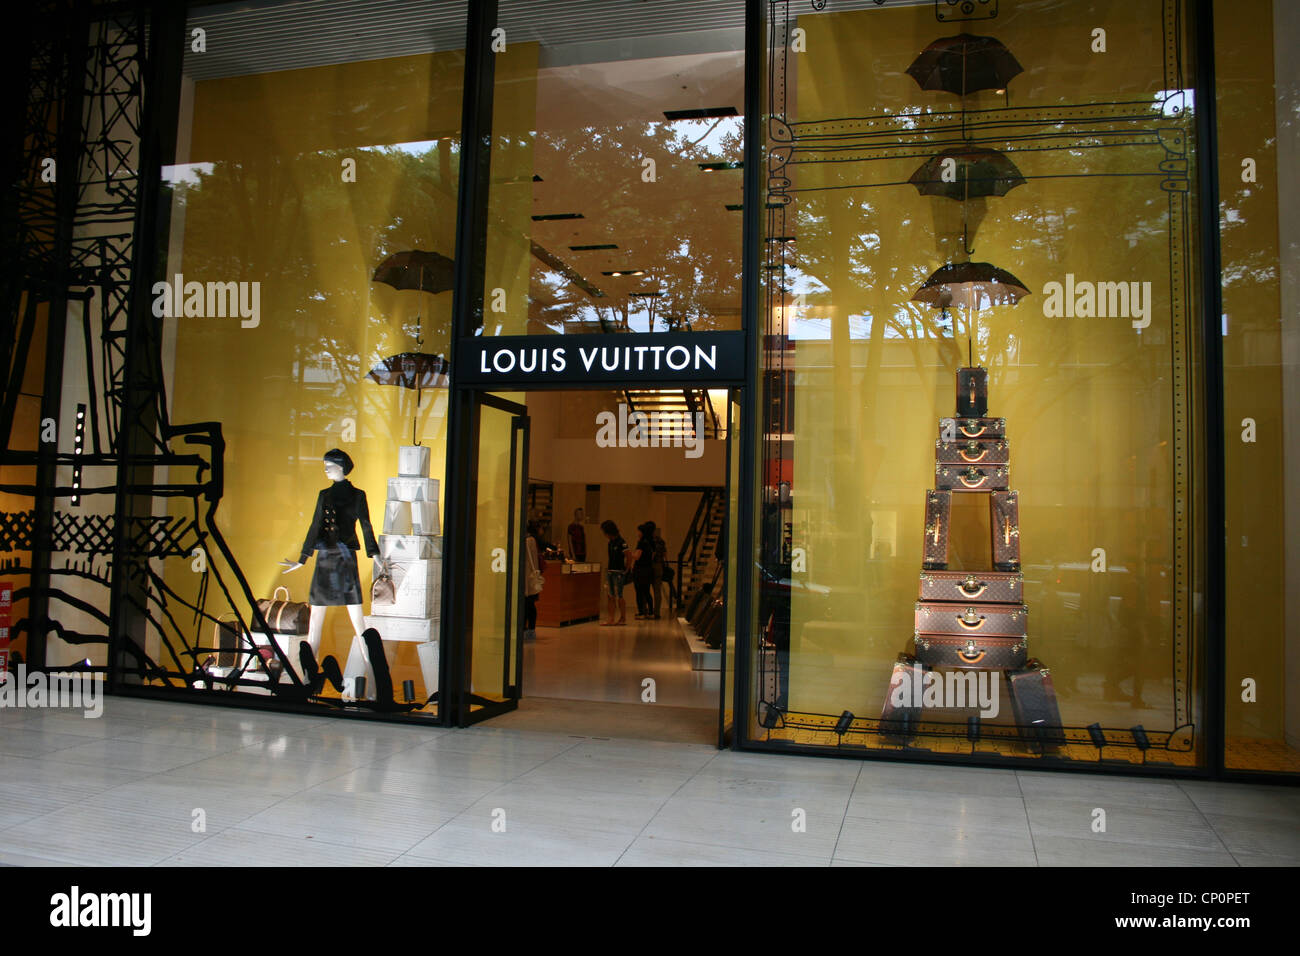 Exterior of Louis Vuitton on Omotesando Avenue,Tokyo,Japan - Stock Photo -  Masterfile - Rights-Managed, Artist: Axiom Photographic, Code: 851-02961231